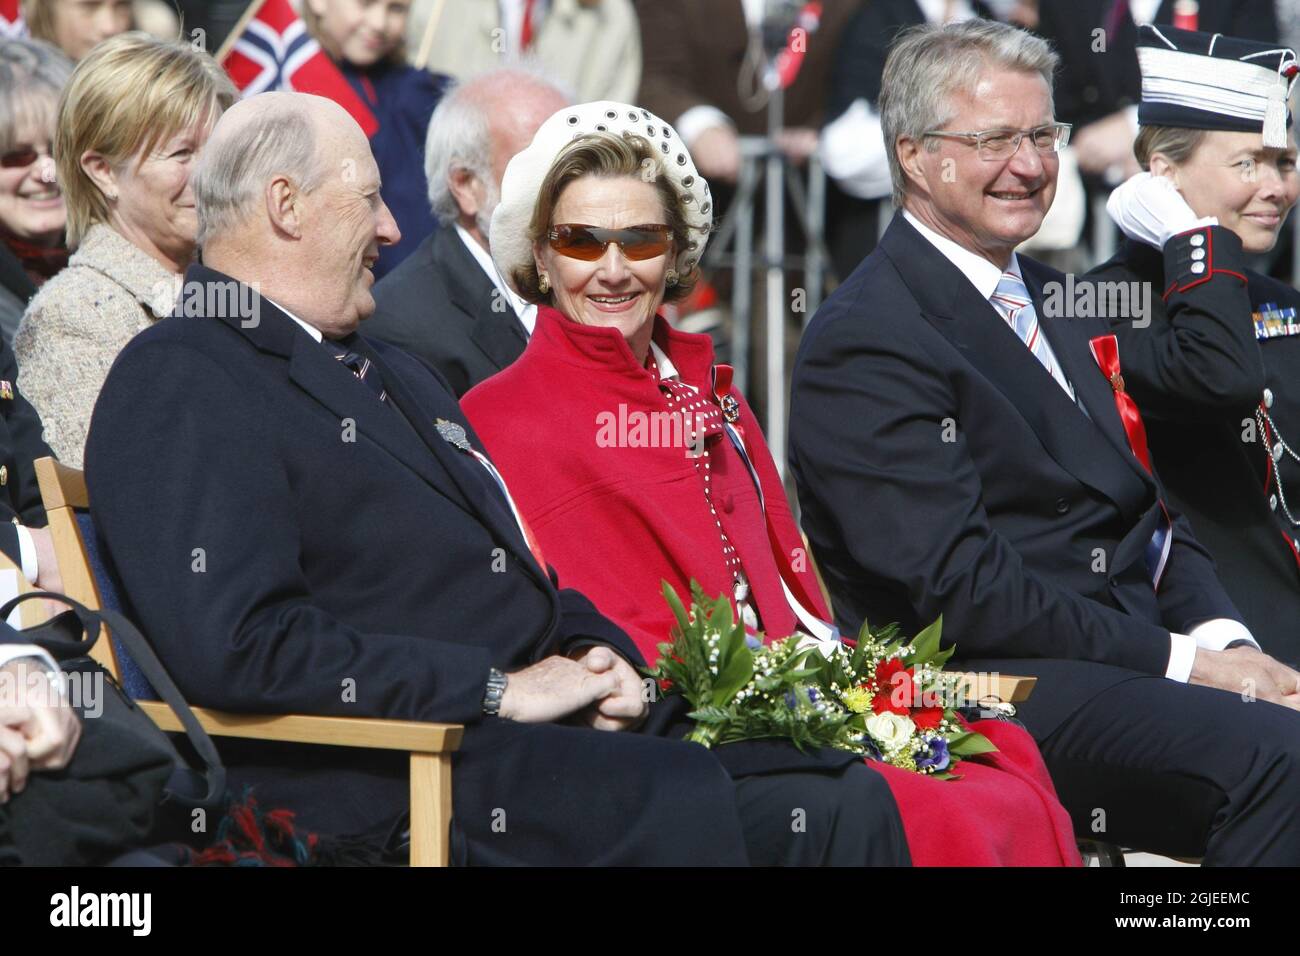 King Harald, Queen Sonya and Oslo Mayor Fabian Stang in Vestre Aker during the 17th May Norwegian National Day celebrations in Oslo, Norway. Stock Photo